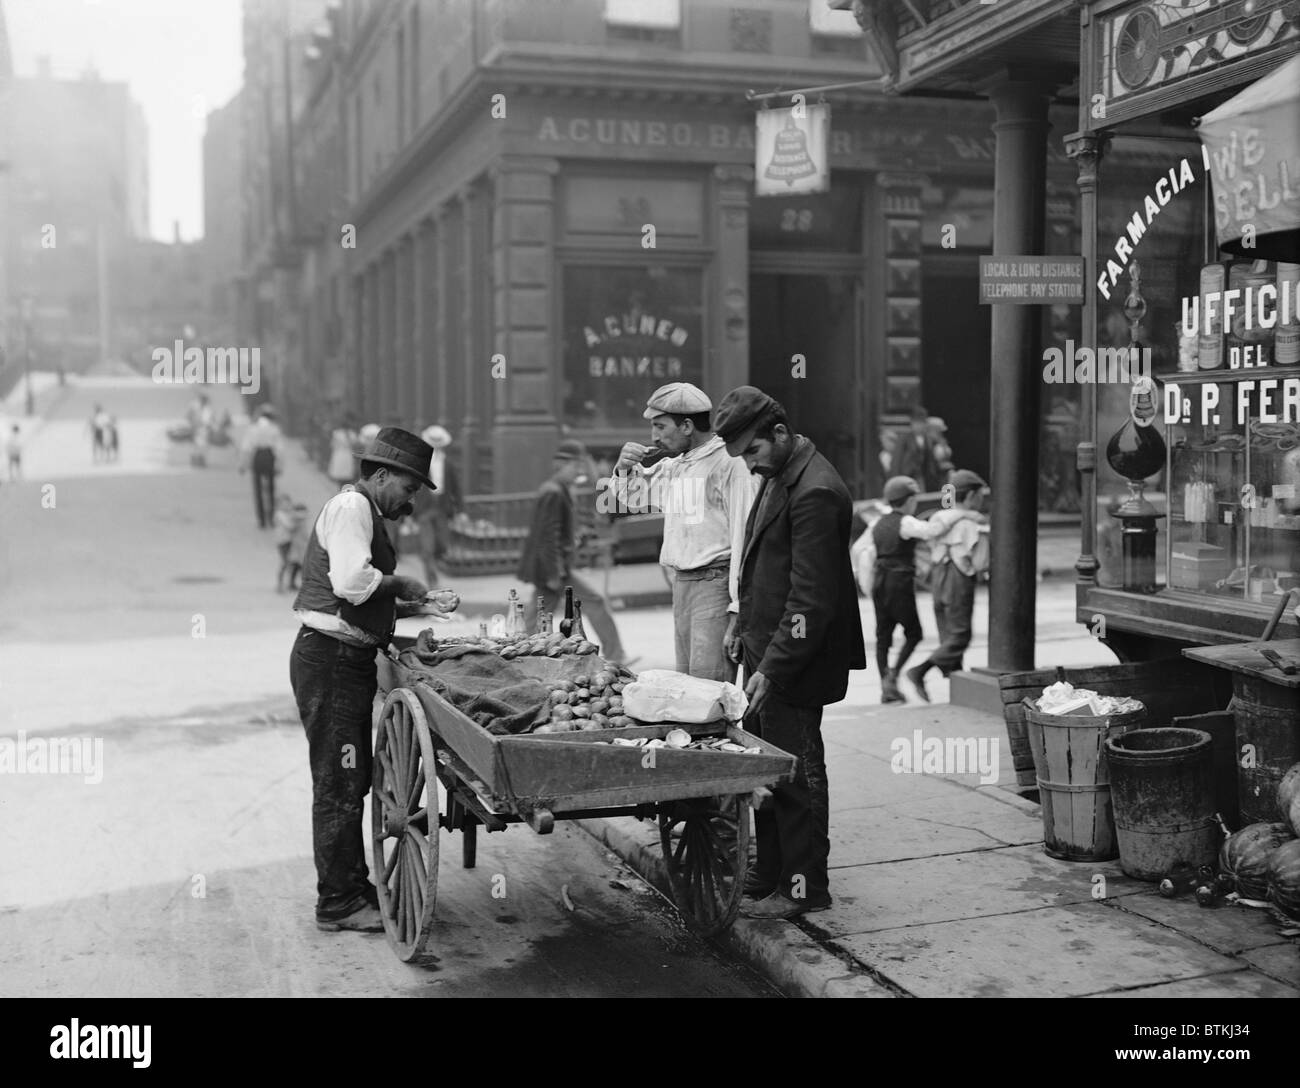 Men eating fresh clams from a pushcart peddler in the Italian neighborhood of Mulberry Bend in New York City. Ca. 1900 photograph by Byron. Stock Photo